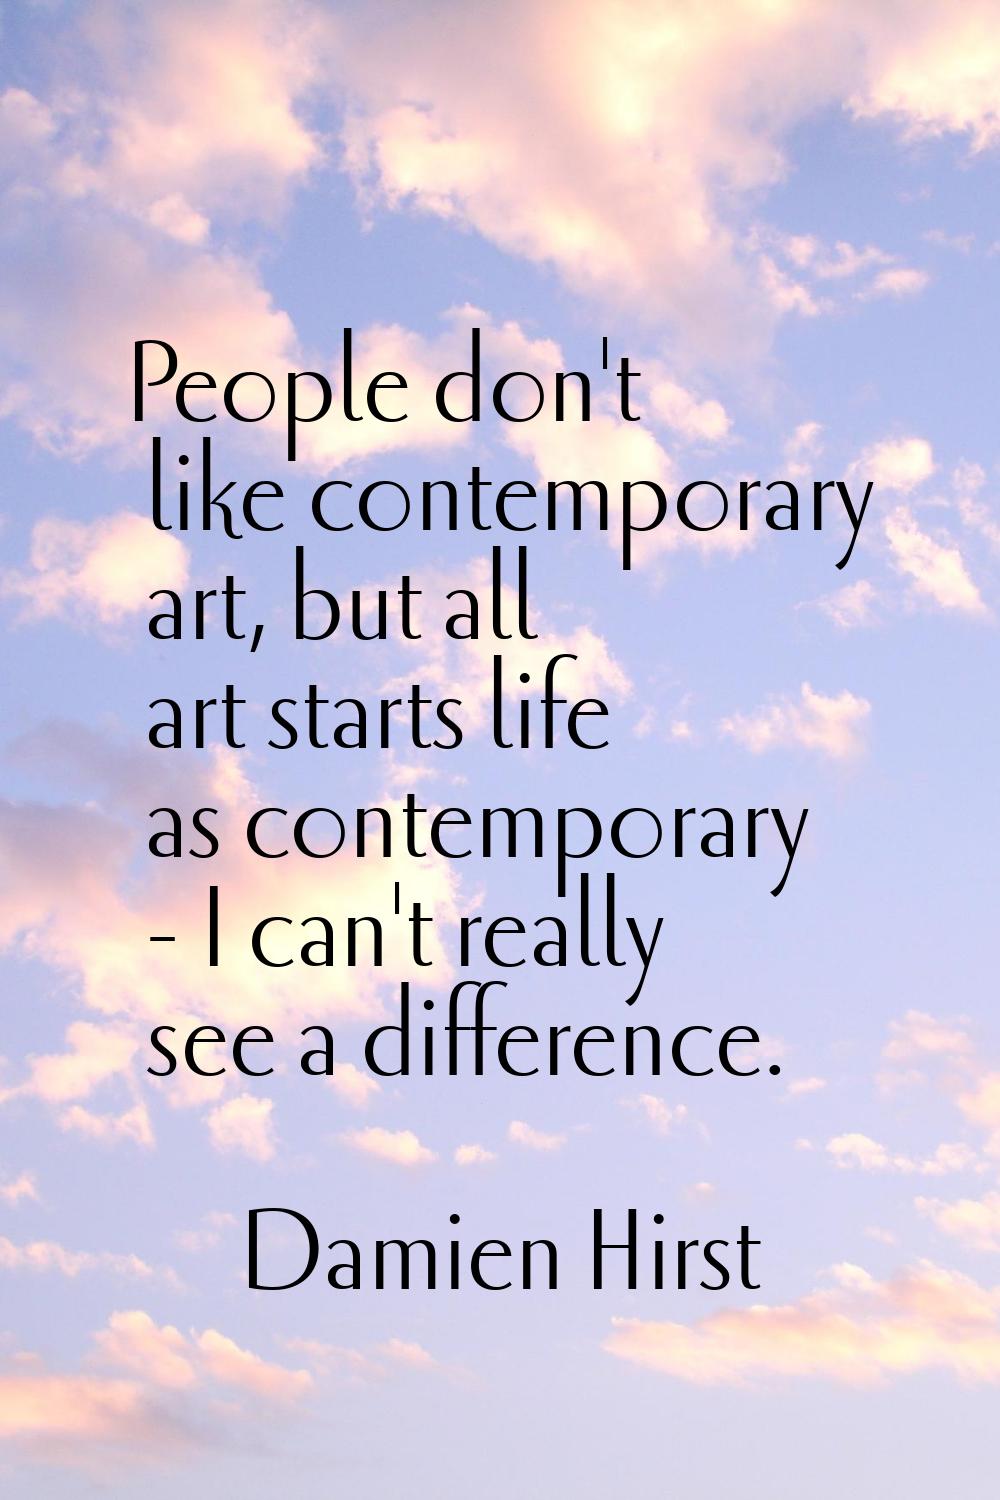 People don't like contemporary art, but all art starts life as contemporary - I can't really see a 